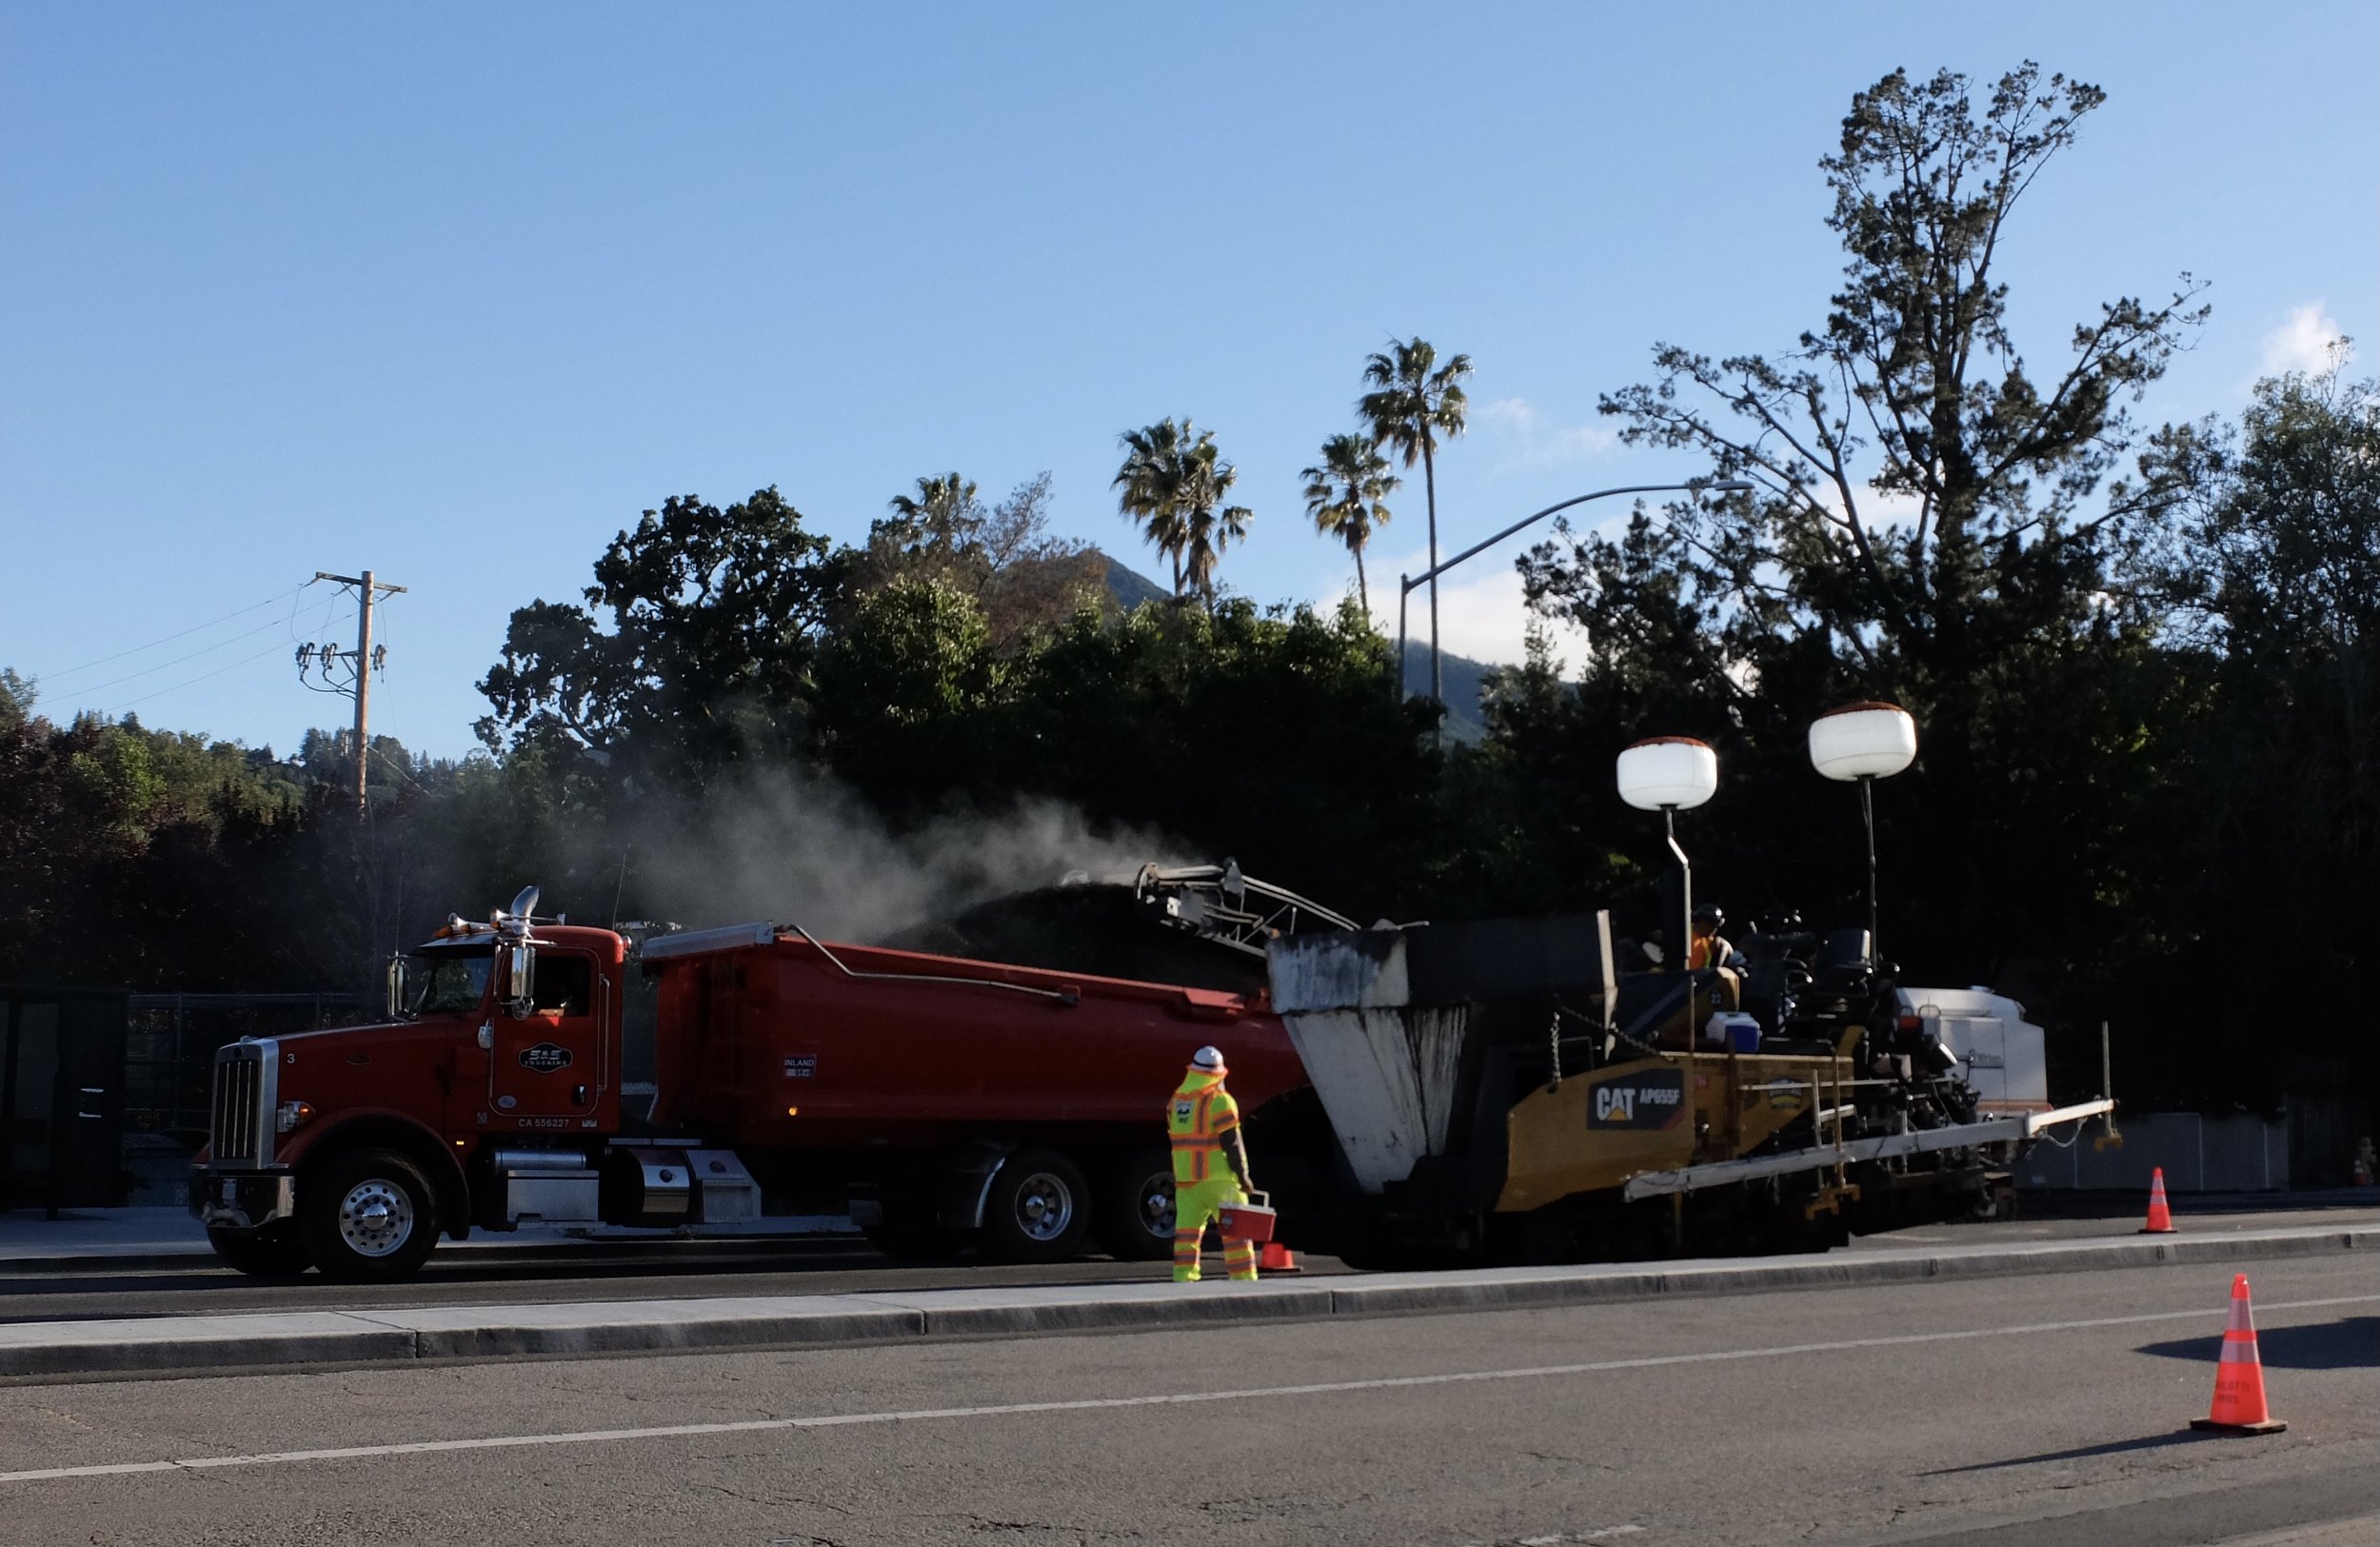 And the work continued on the Sir Francis Drake Blvd. Rehab. Project with the asphalt paving.